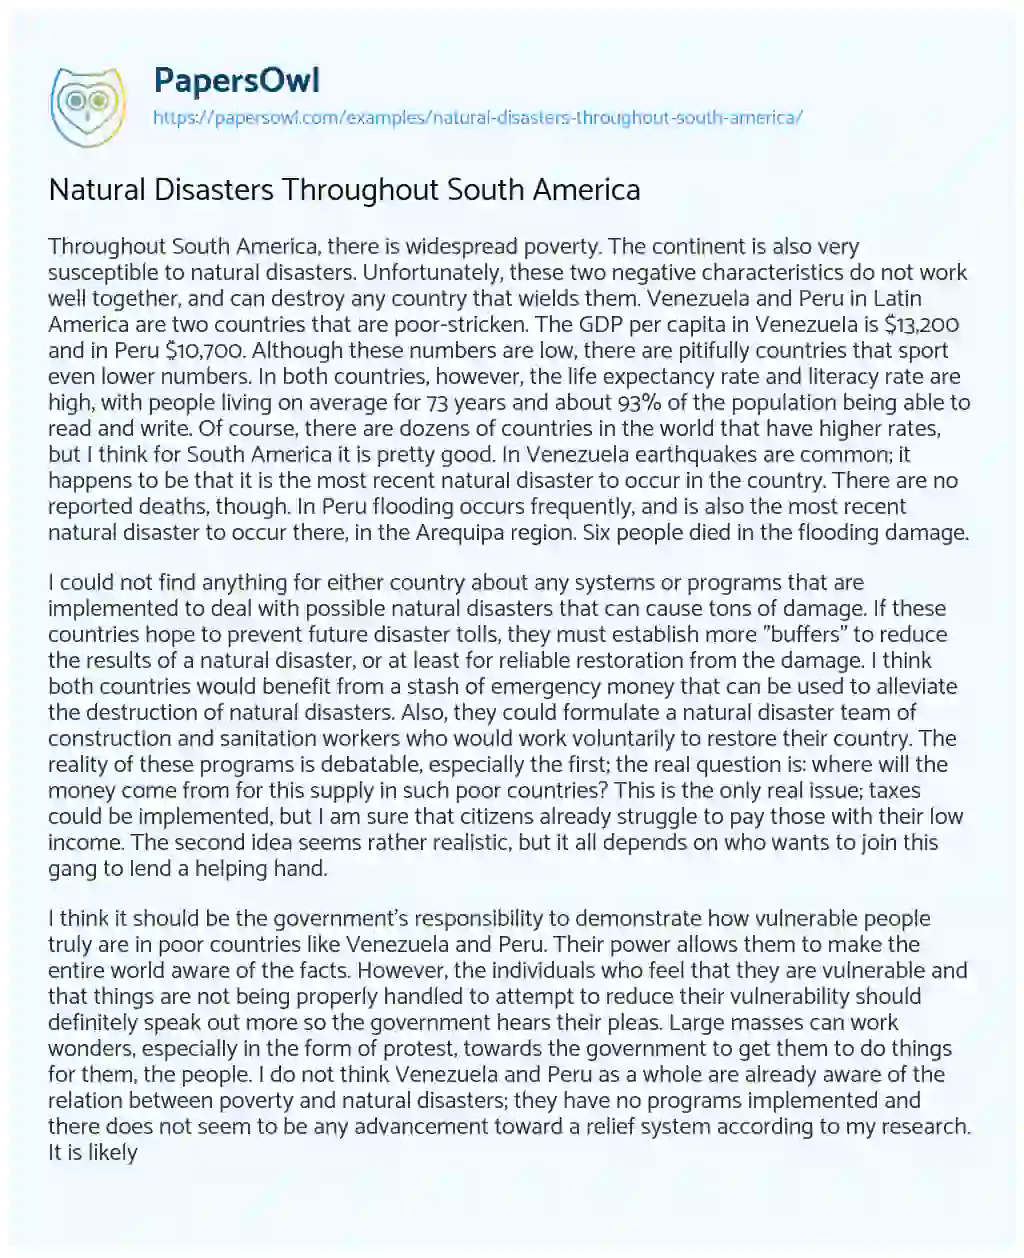 Essay on Natural Disasters Throughout South America